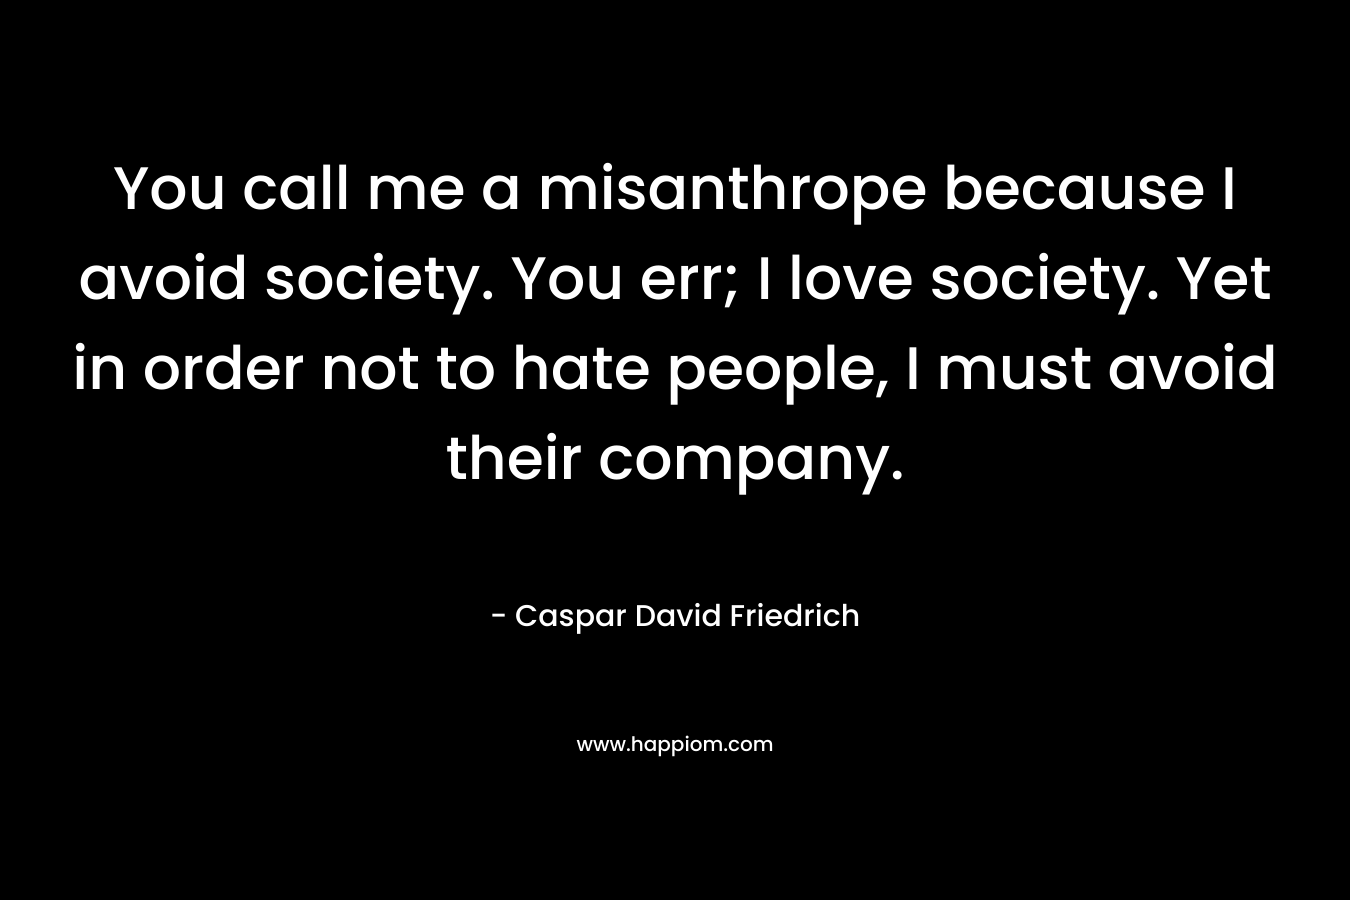 You call me a misanthrope because I avoid society. You err; I love society. Yet in order not to hate people, I must avoid their company.